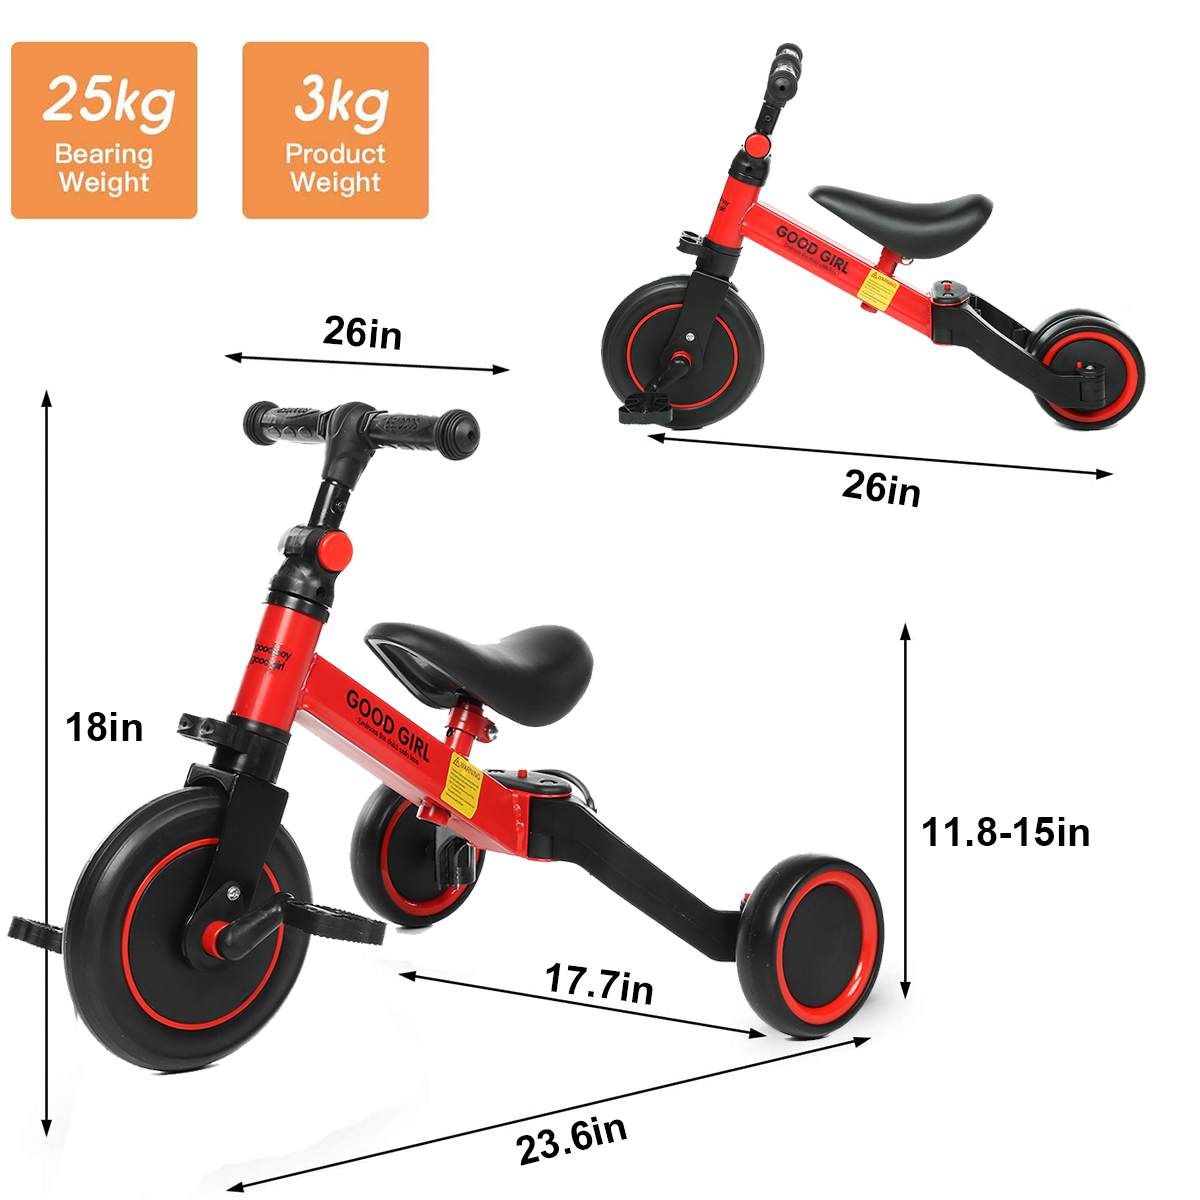 Mini Baby Balance Bike Bicycle Walker Indoor Outdoor Kids Ride on Car Toys Gift for 1-3 years Old Children Learning Walk Scooter